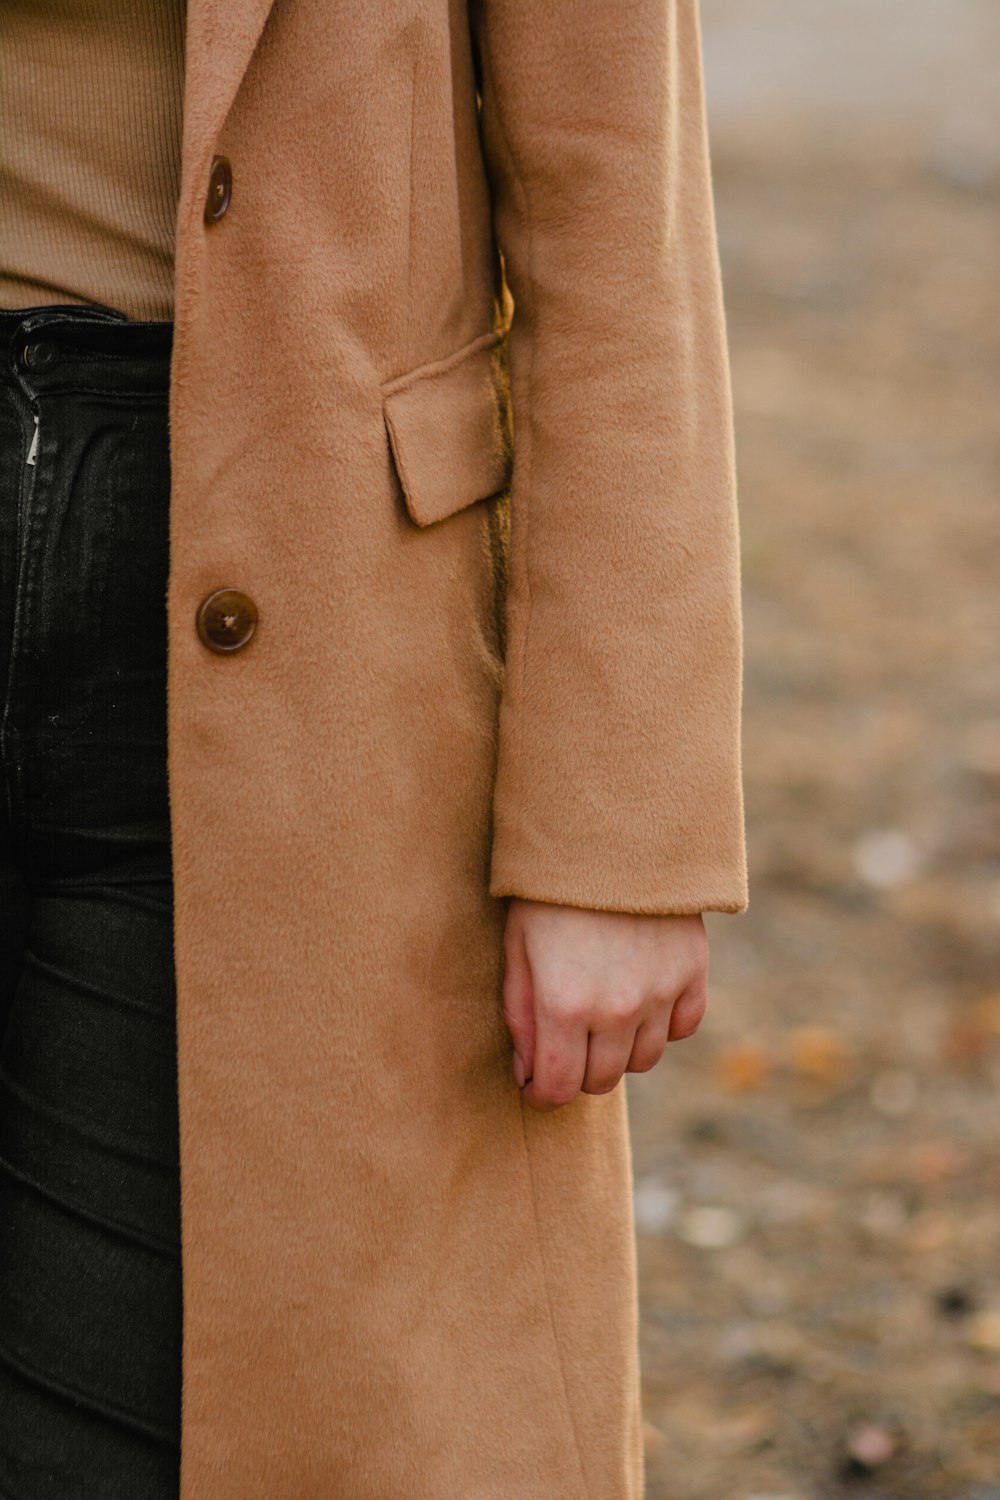 a woman wearing a tan coat and black jeans